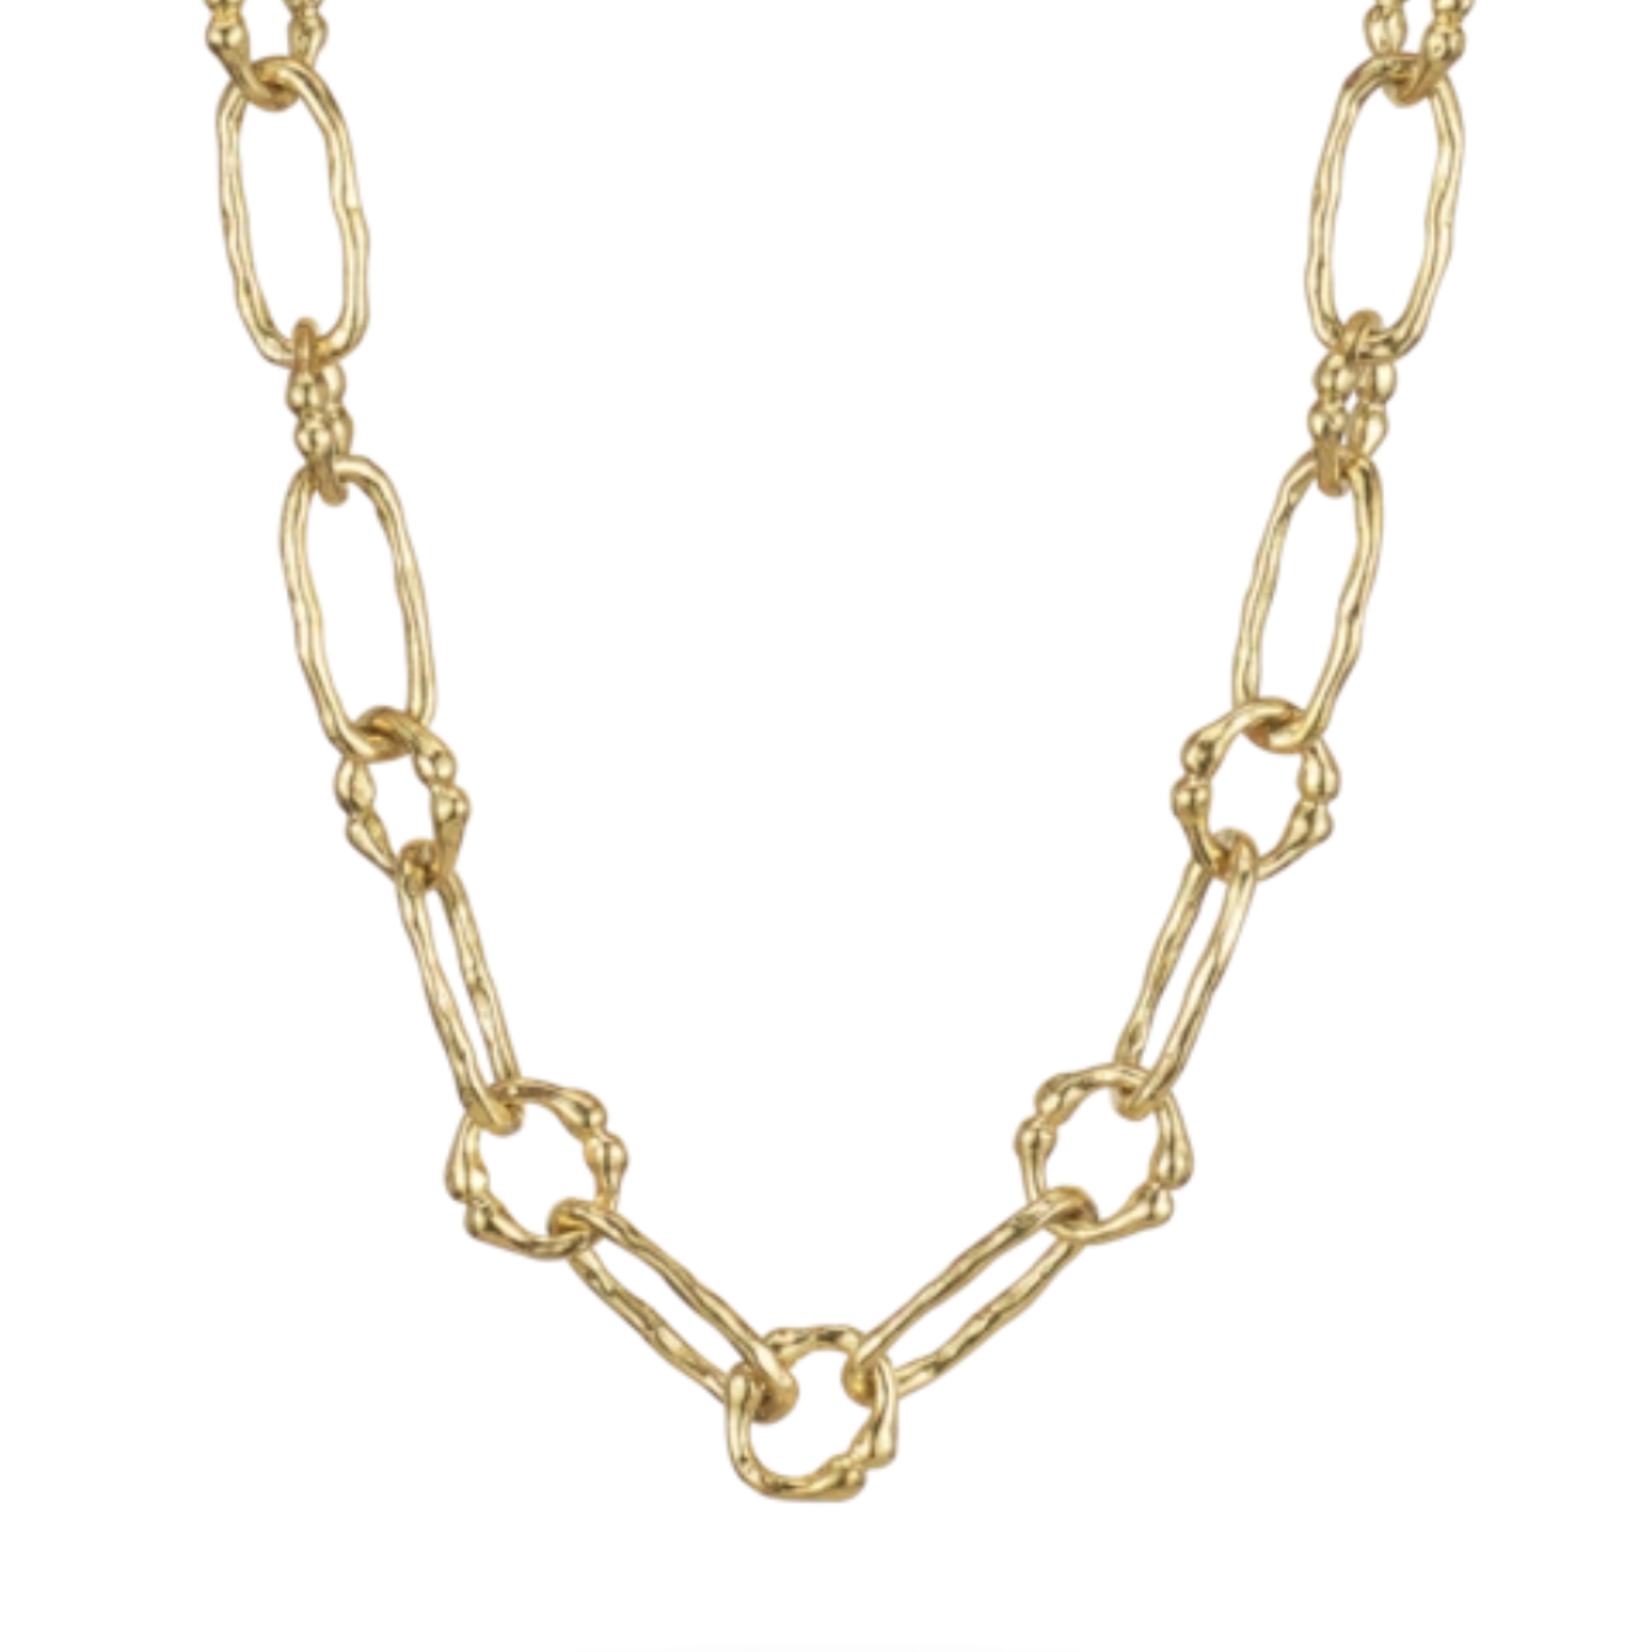 Desire is doing 20" chain necklace - ceramic coated brass